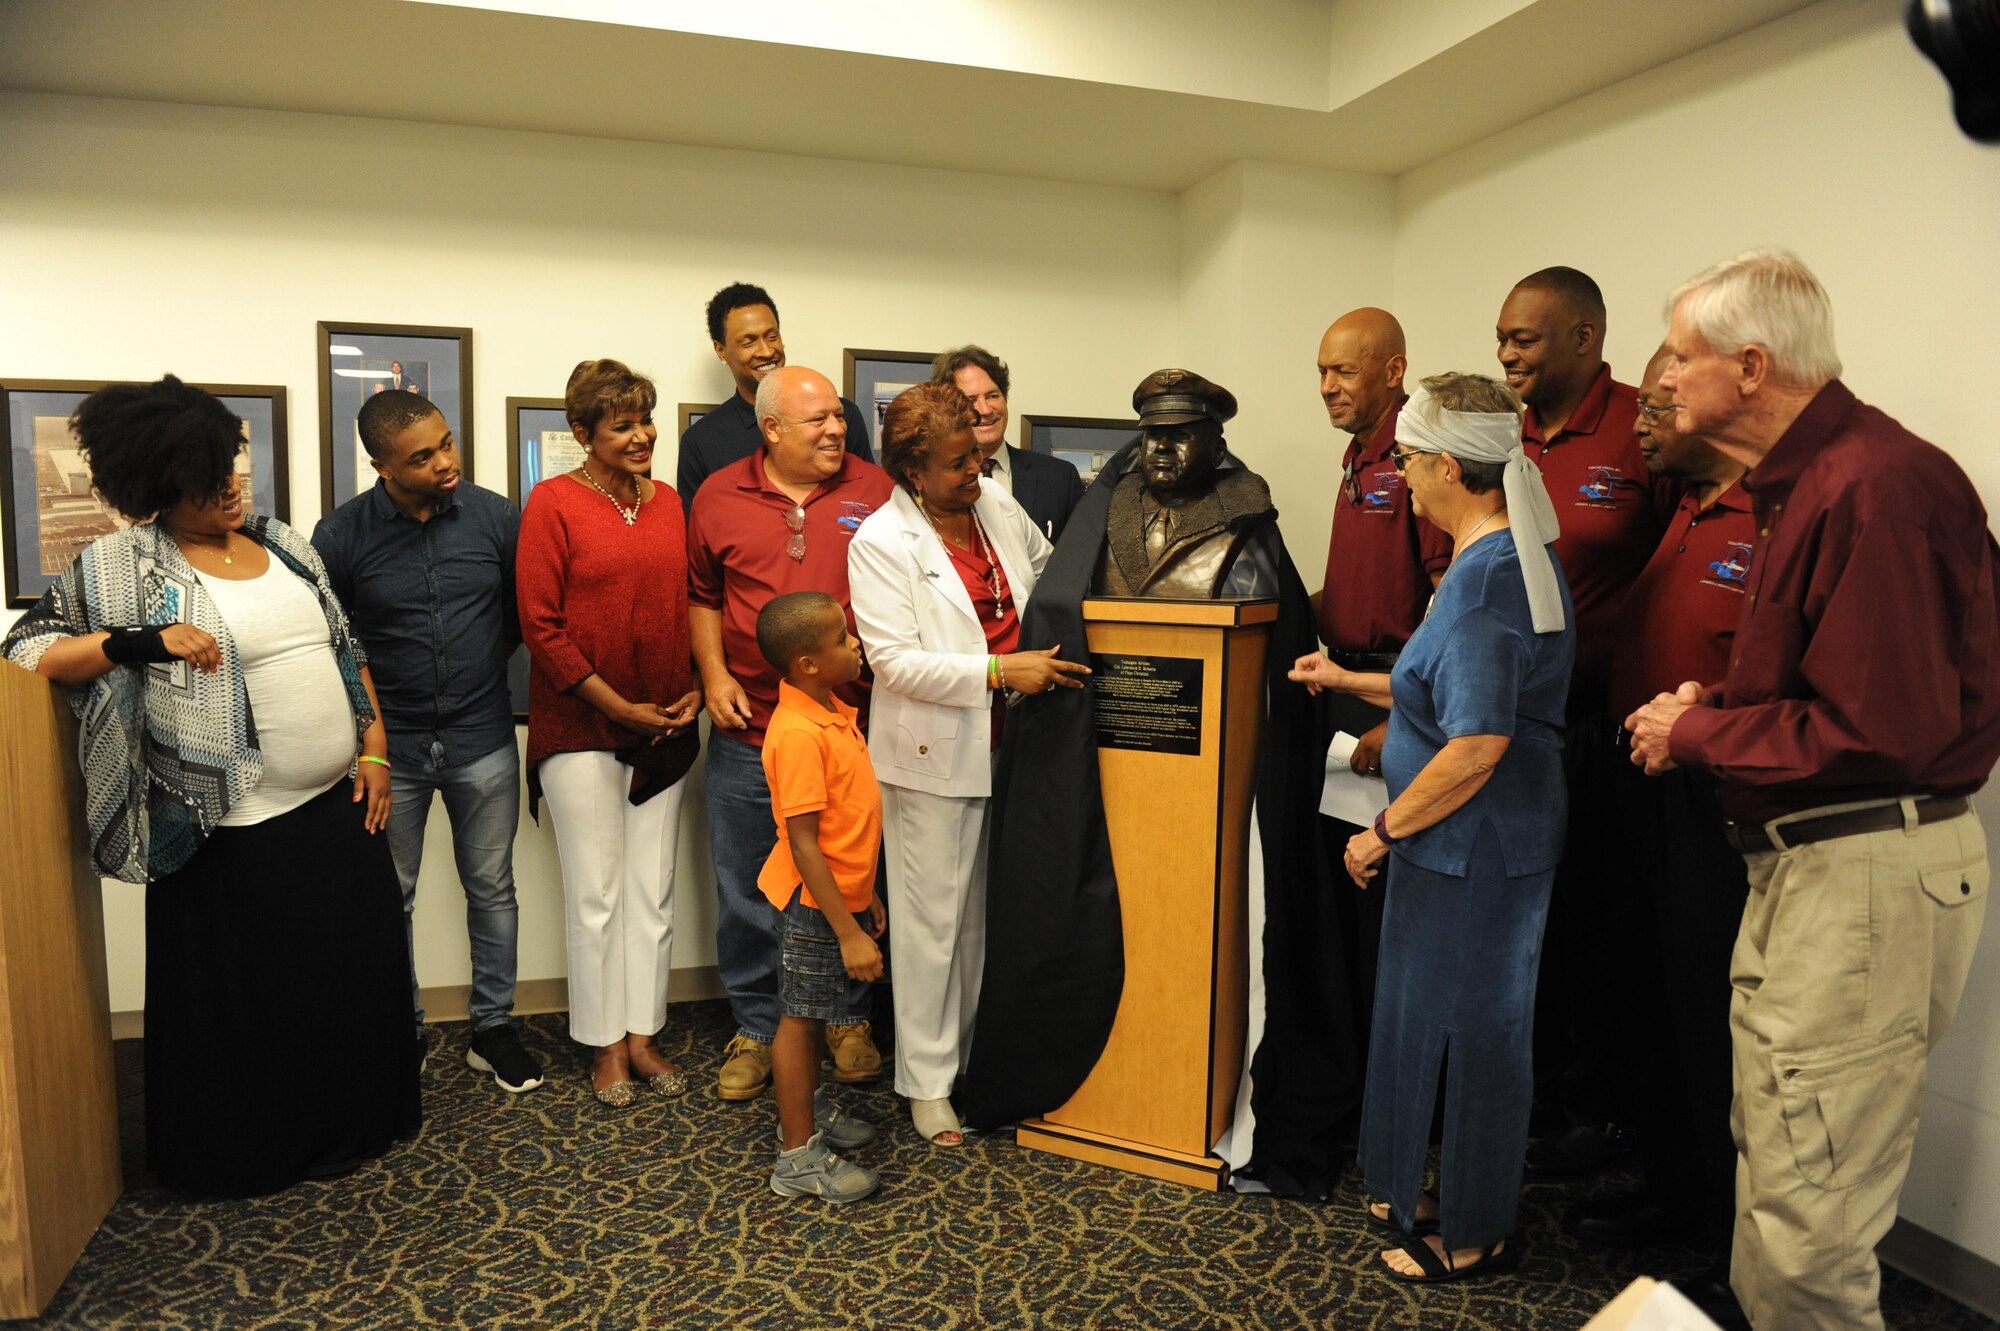 Family members and friends of Col. Lawrence E. Roberts, Tuskegee Airman, unveil a sculptured bust in his honor at the Gulfport-Biloxi International Airport July 13, 2016, Gulfport, Miss. Keesler personnel, family members, friends and community representatives gathered for the ceremony to honor Roberts, who began and ended his 32-year military career at Keesler. (U.S. Air Force photo by Kemberly Groue/Released)